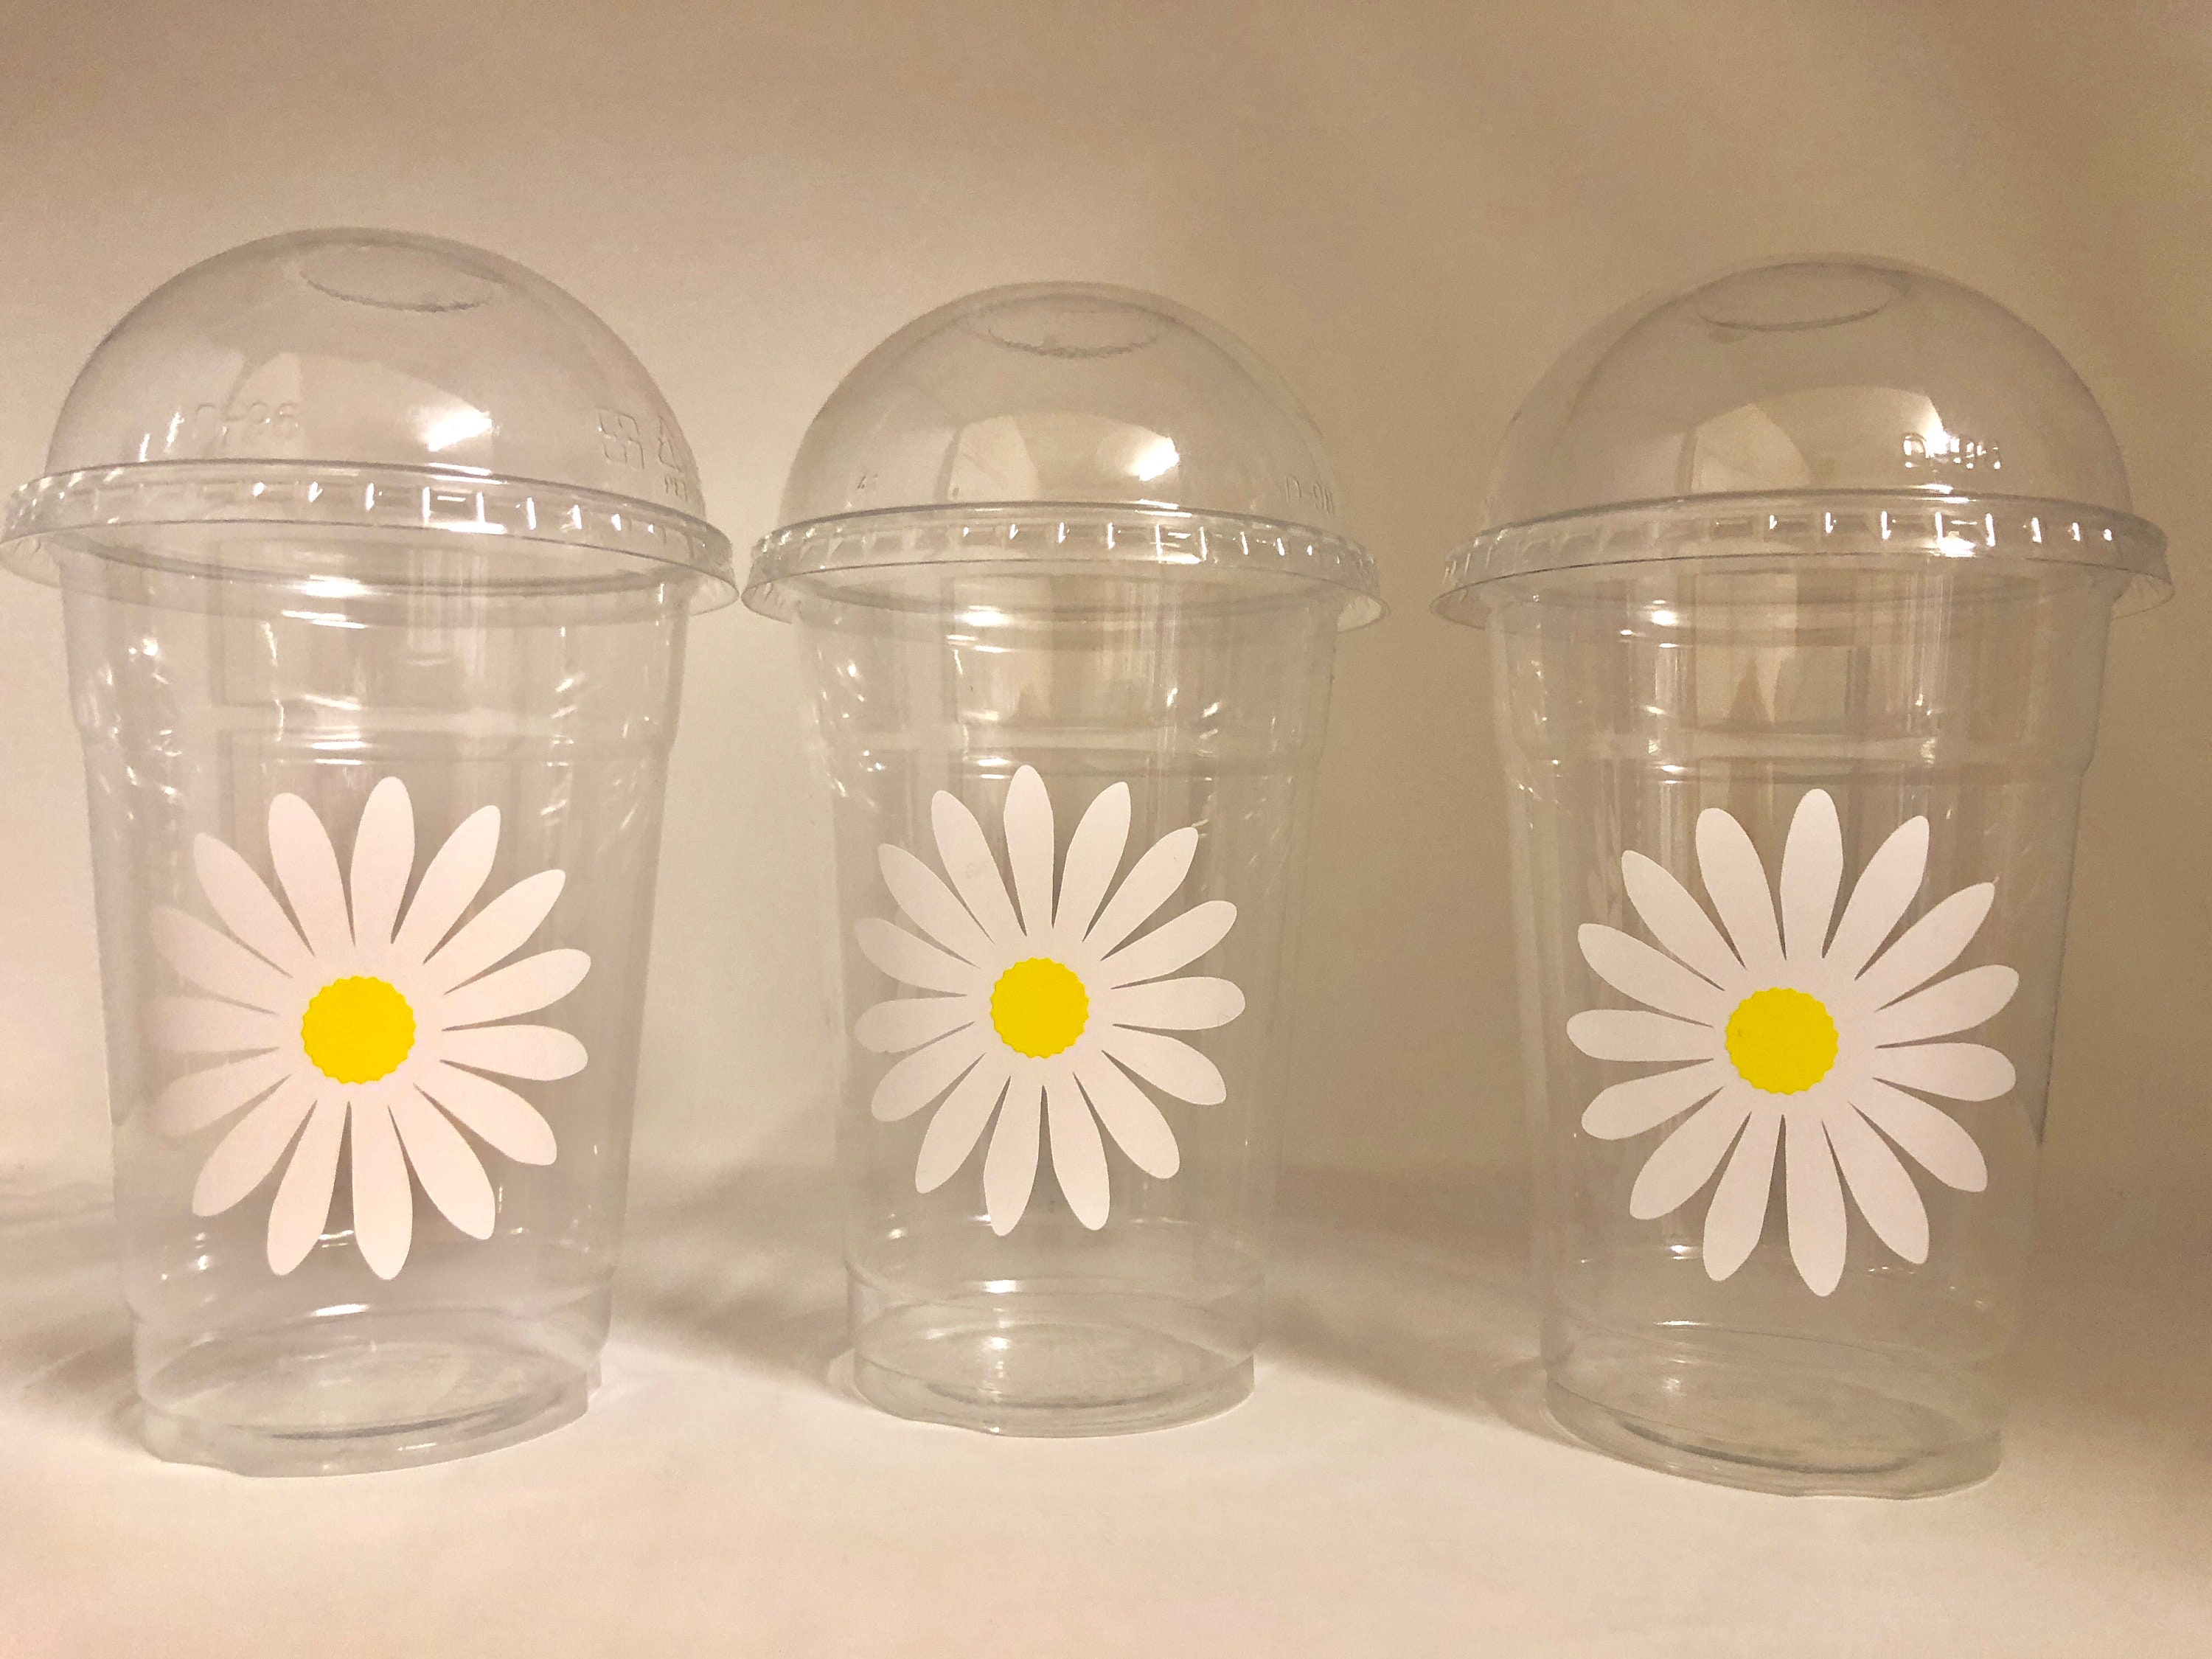 Daisy Plastic Disposable Drink Cups Favor Cup Daisy Baby Shower